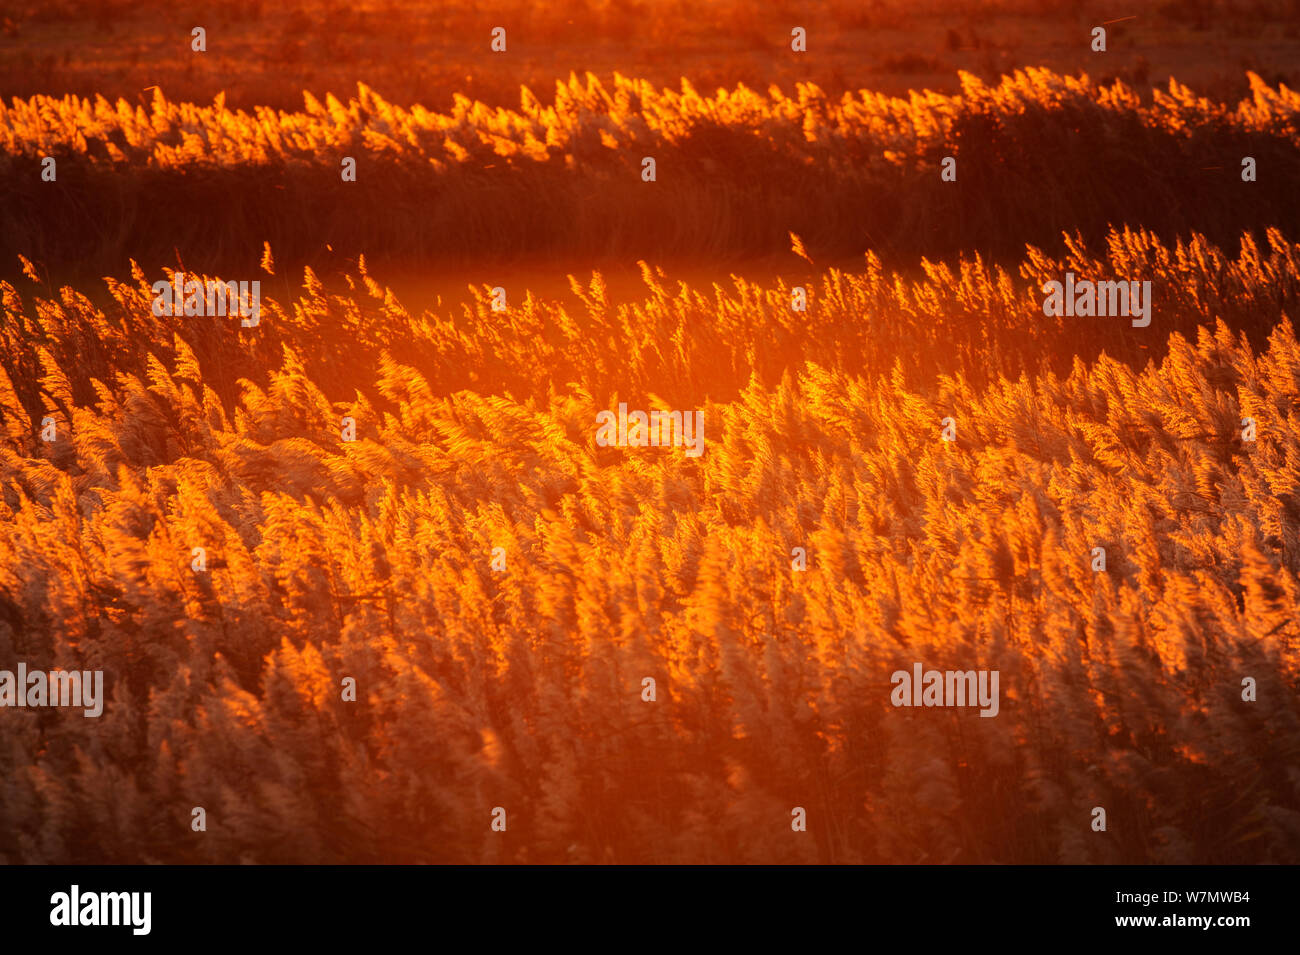 Reed bed at sunset, South Swale Nature Reserve, Kent, England, UK, December. Did you know? Wetlands globally provide trillions of dollars’ worth of services such as absorbing carbon and filtering water. Stock Photo